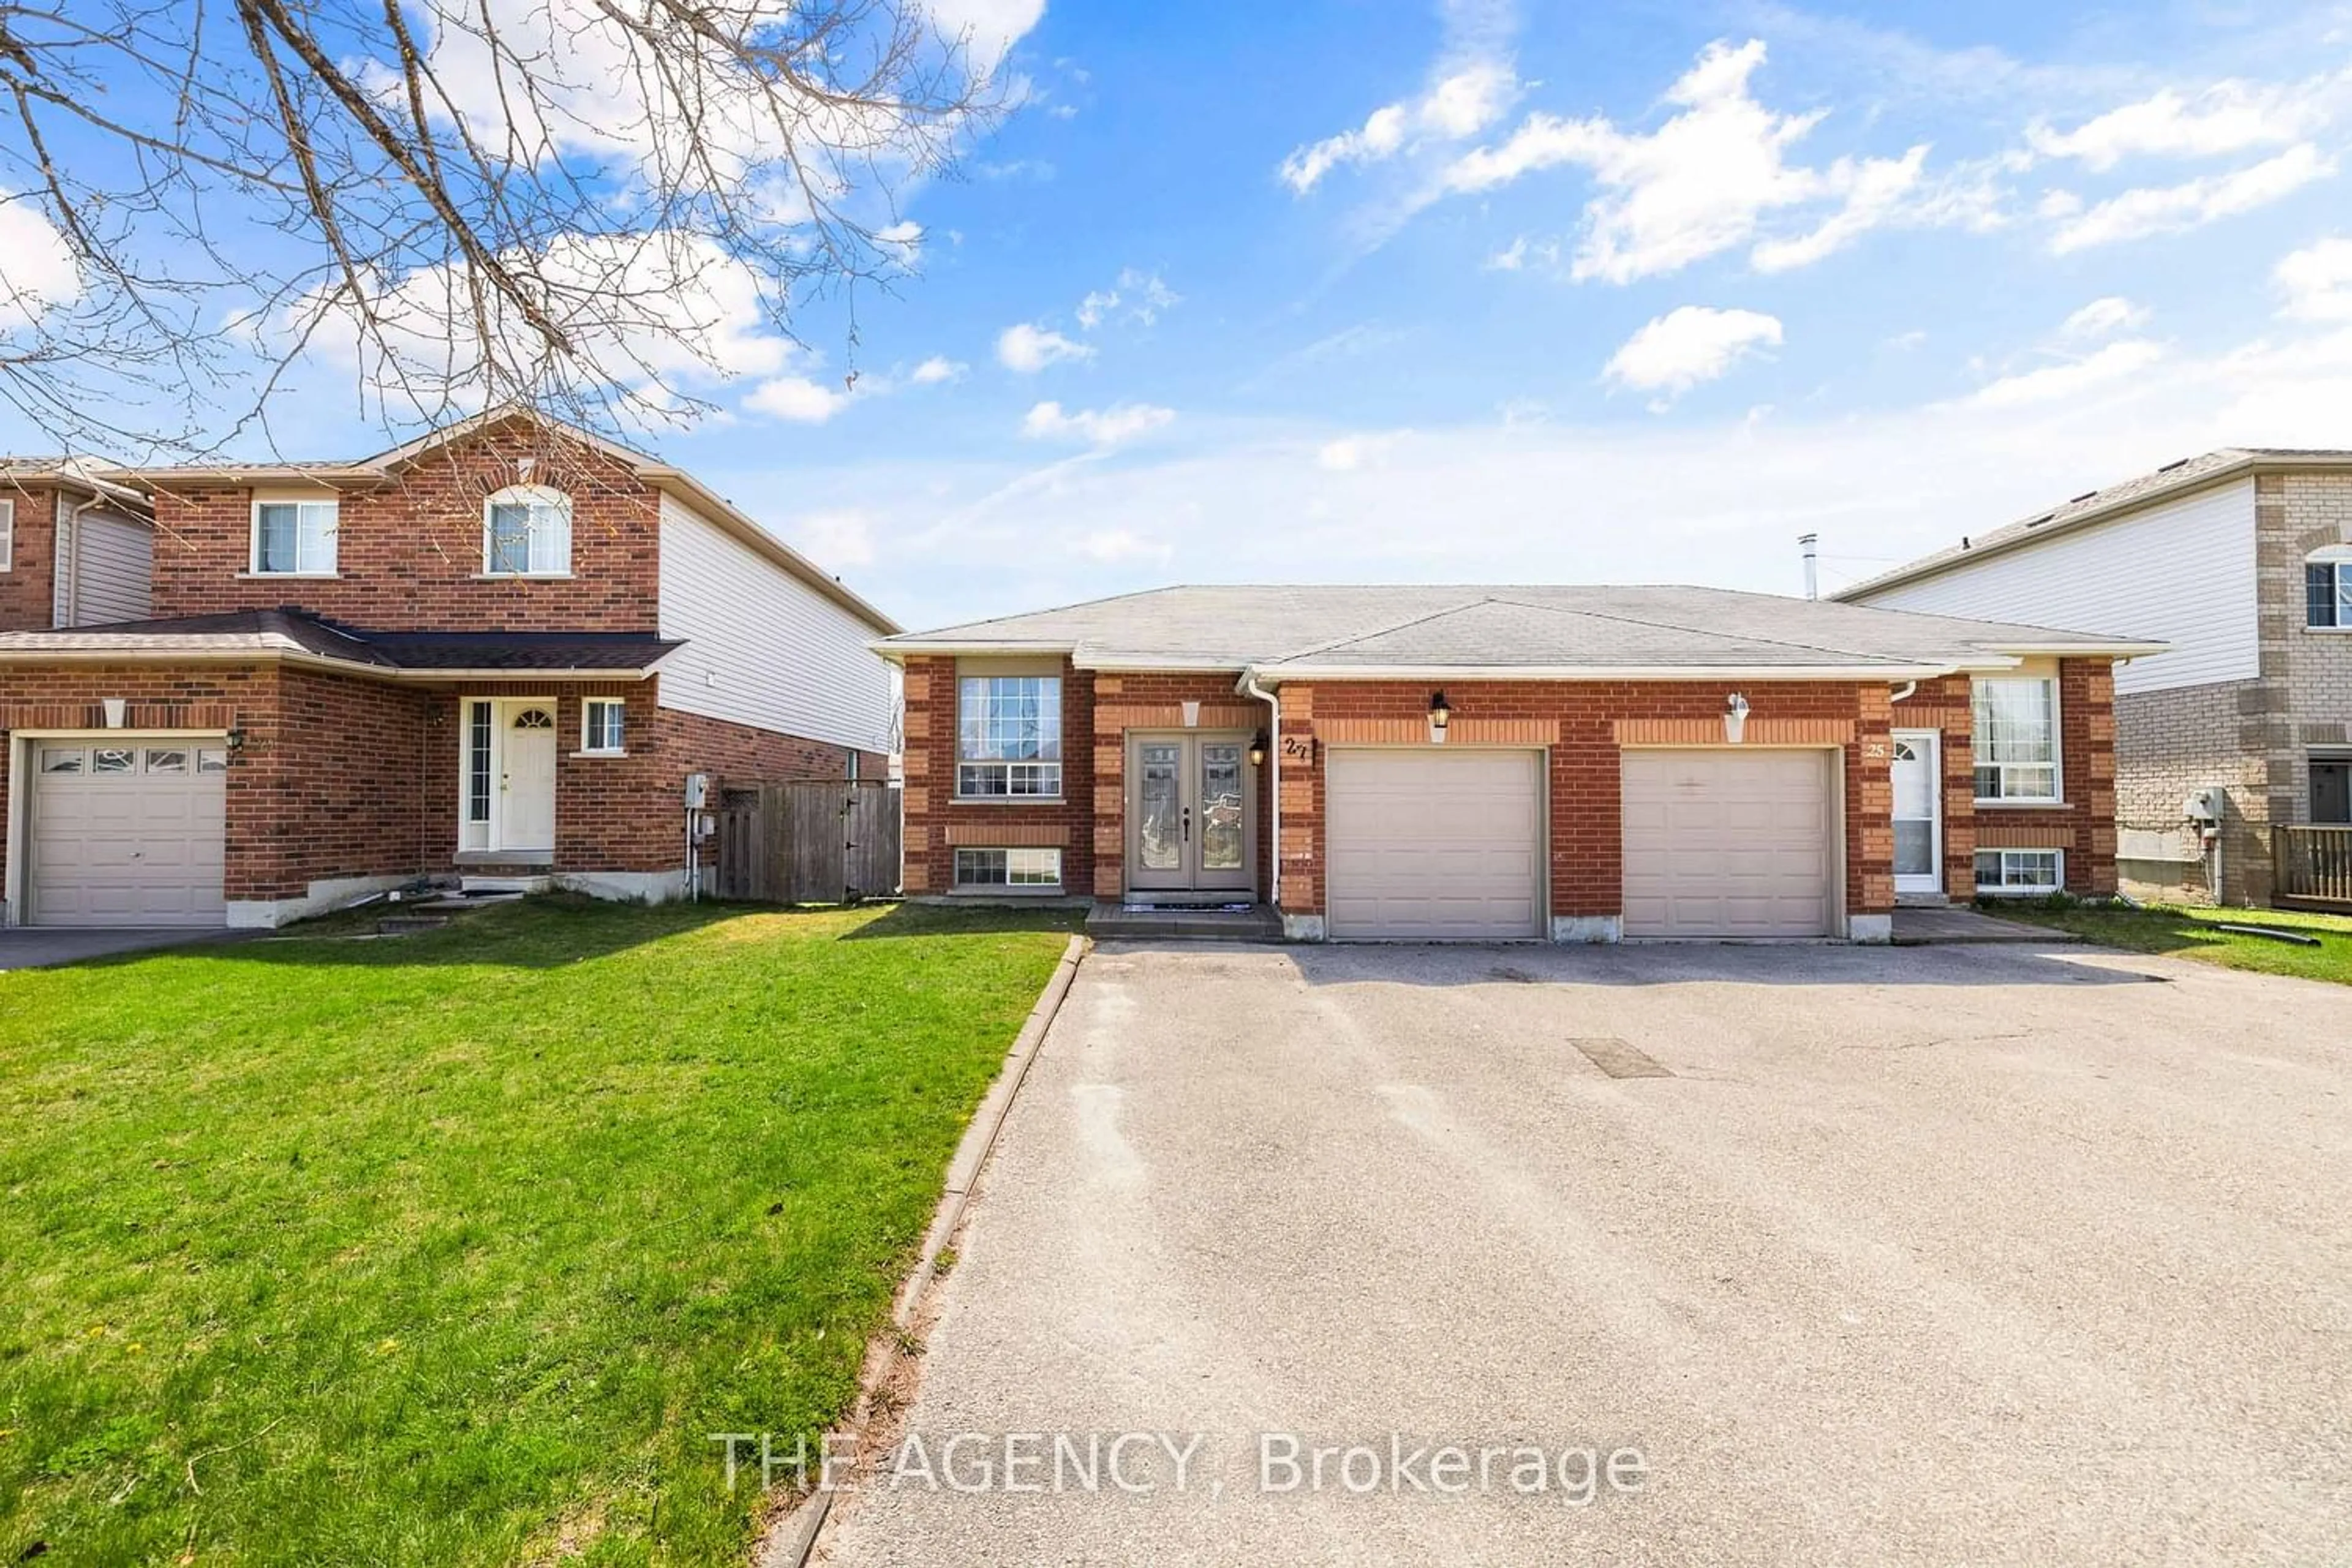 Frontside or backside of a home for 27 Kate Aitken Cres, New Tecumseth Ontario L0G 1A0